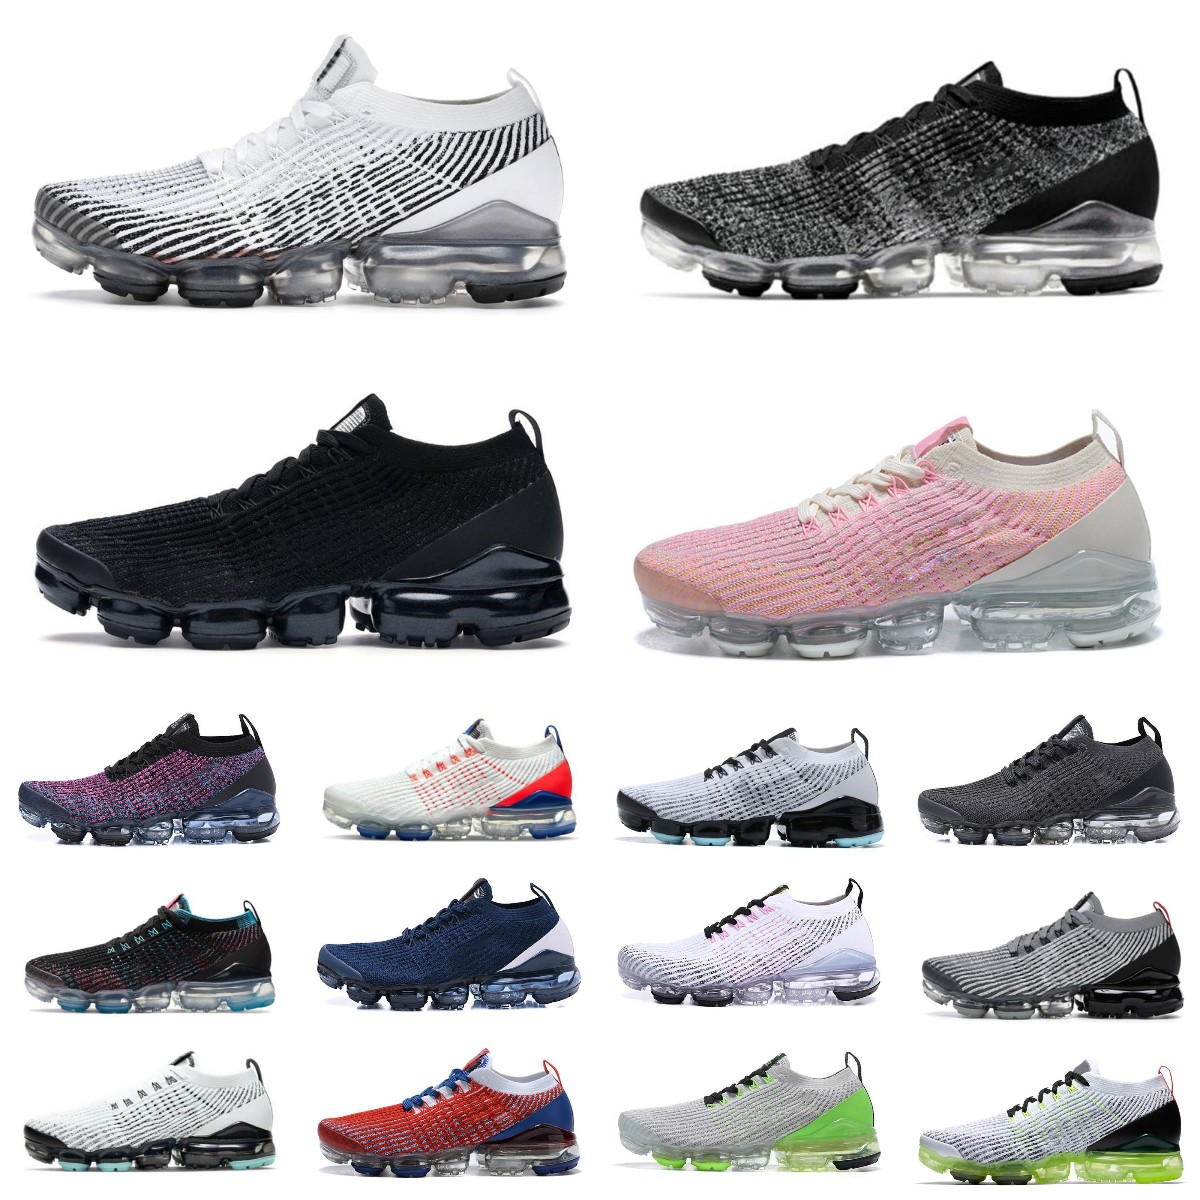 

NEW Fly 3.0 Knit 3.0 Running Shoes Mens Sneaker Triple White Black USA Pink Oreo Glow Green Particle Grey Blue Fury Pure Platinum Men Women Trainers Sports Sneakers, Bubble column